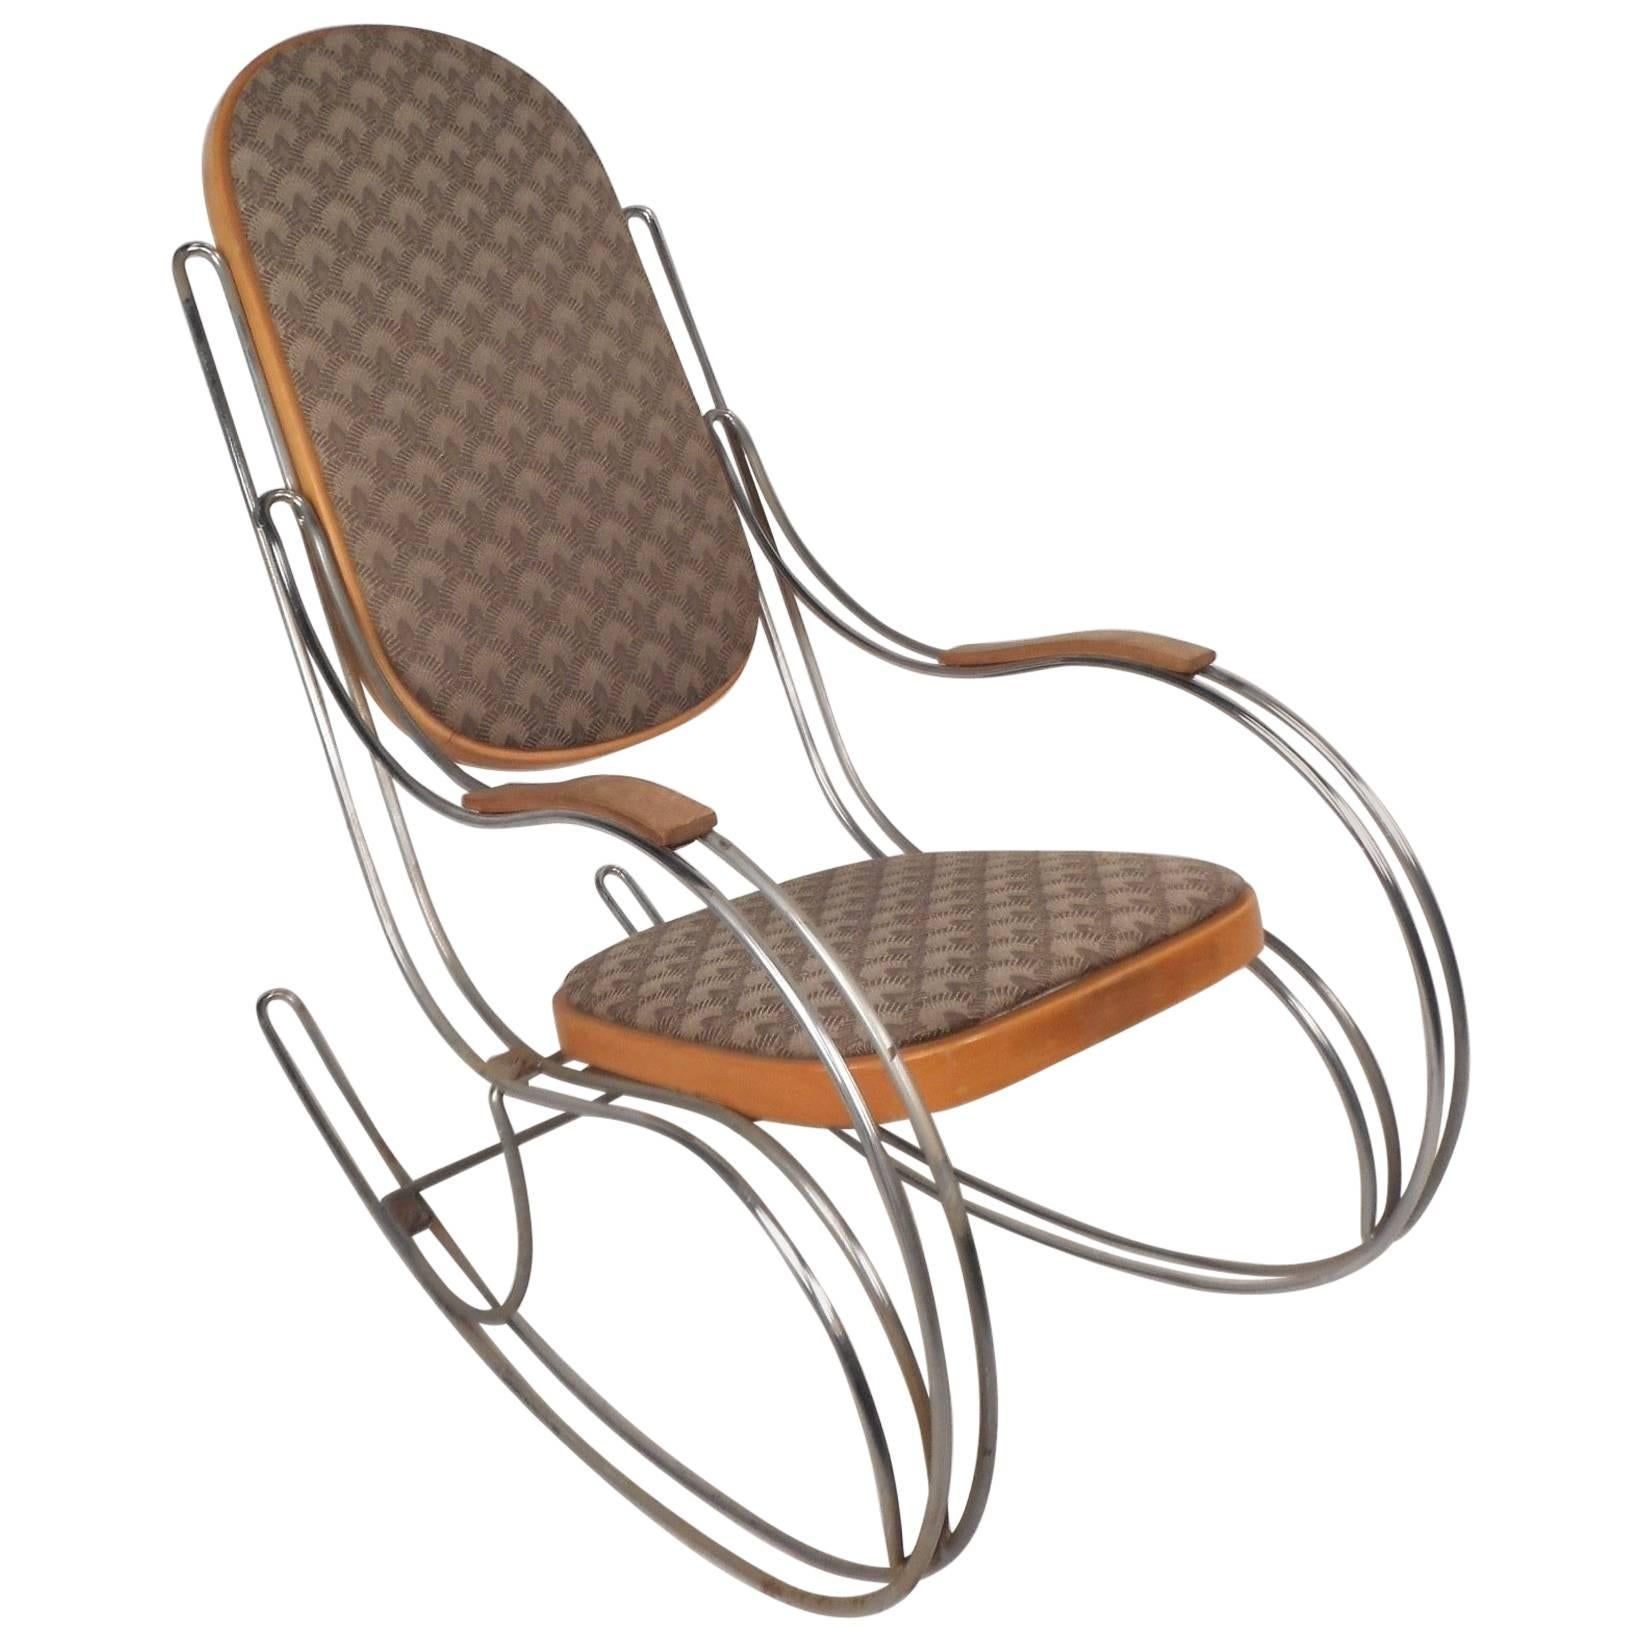 Amazing Mid-Century Modern Rocking Chair in the Style of Thonet